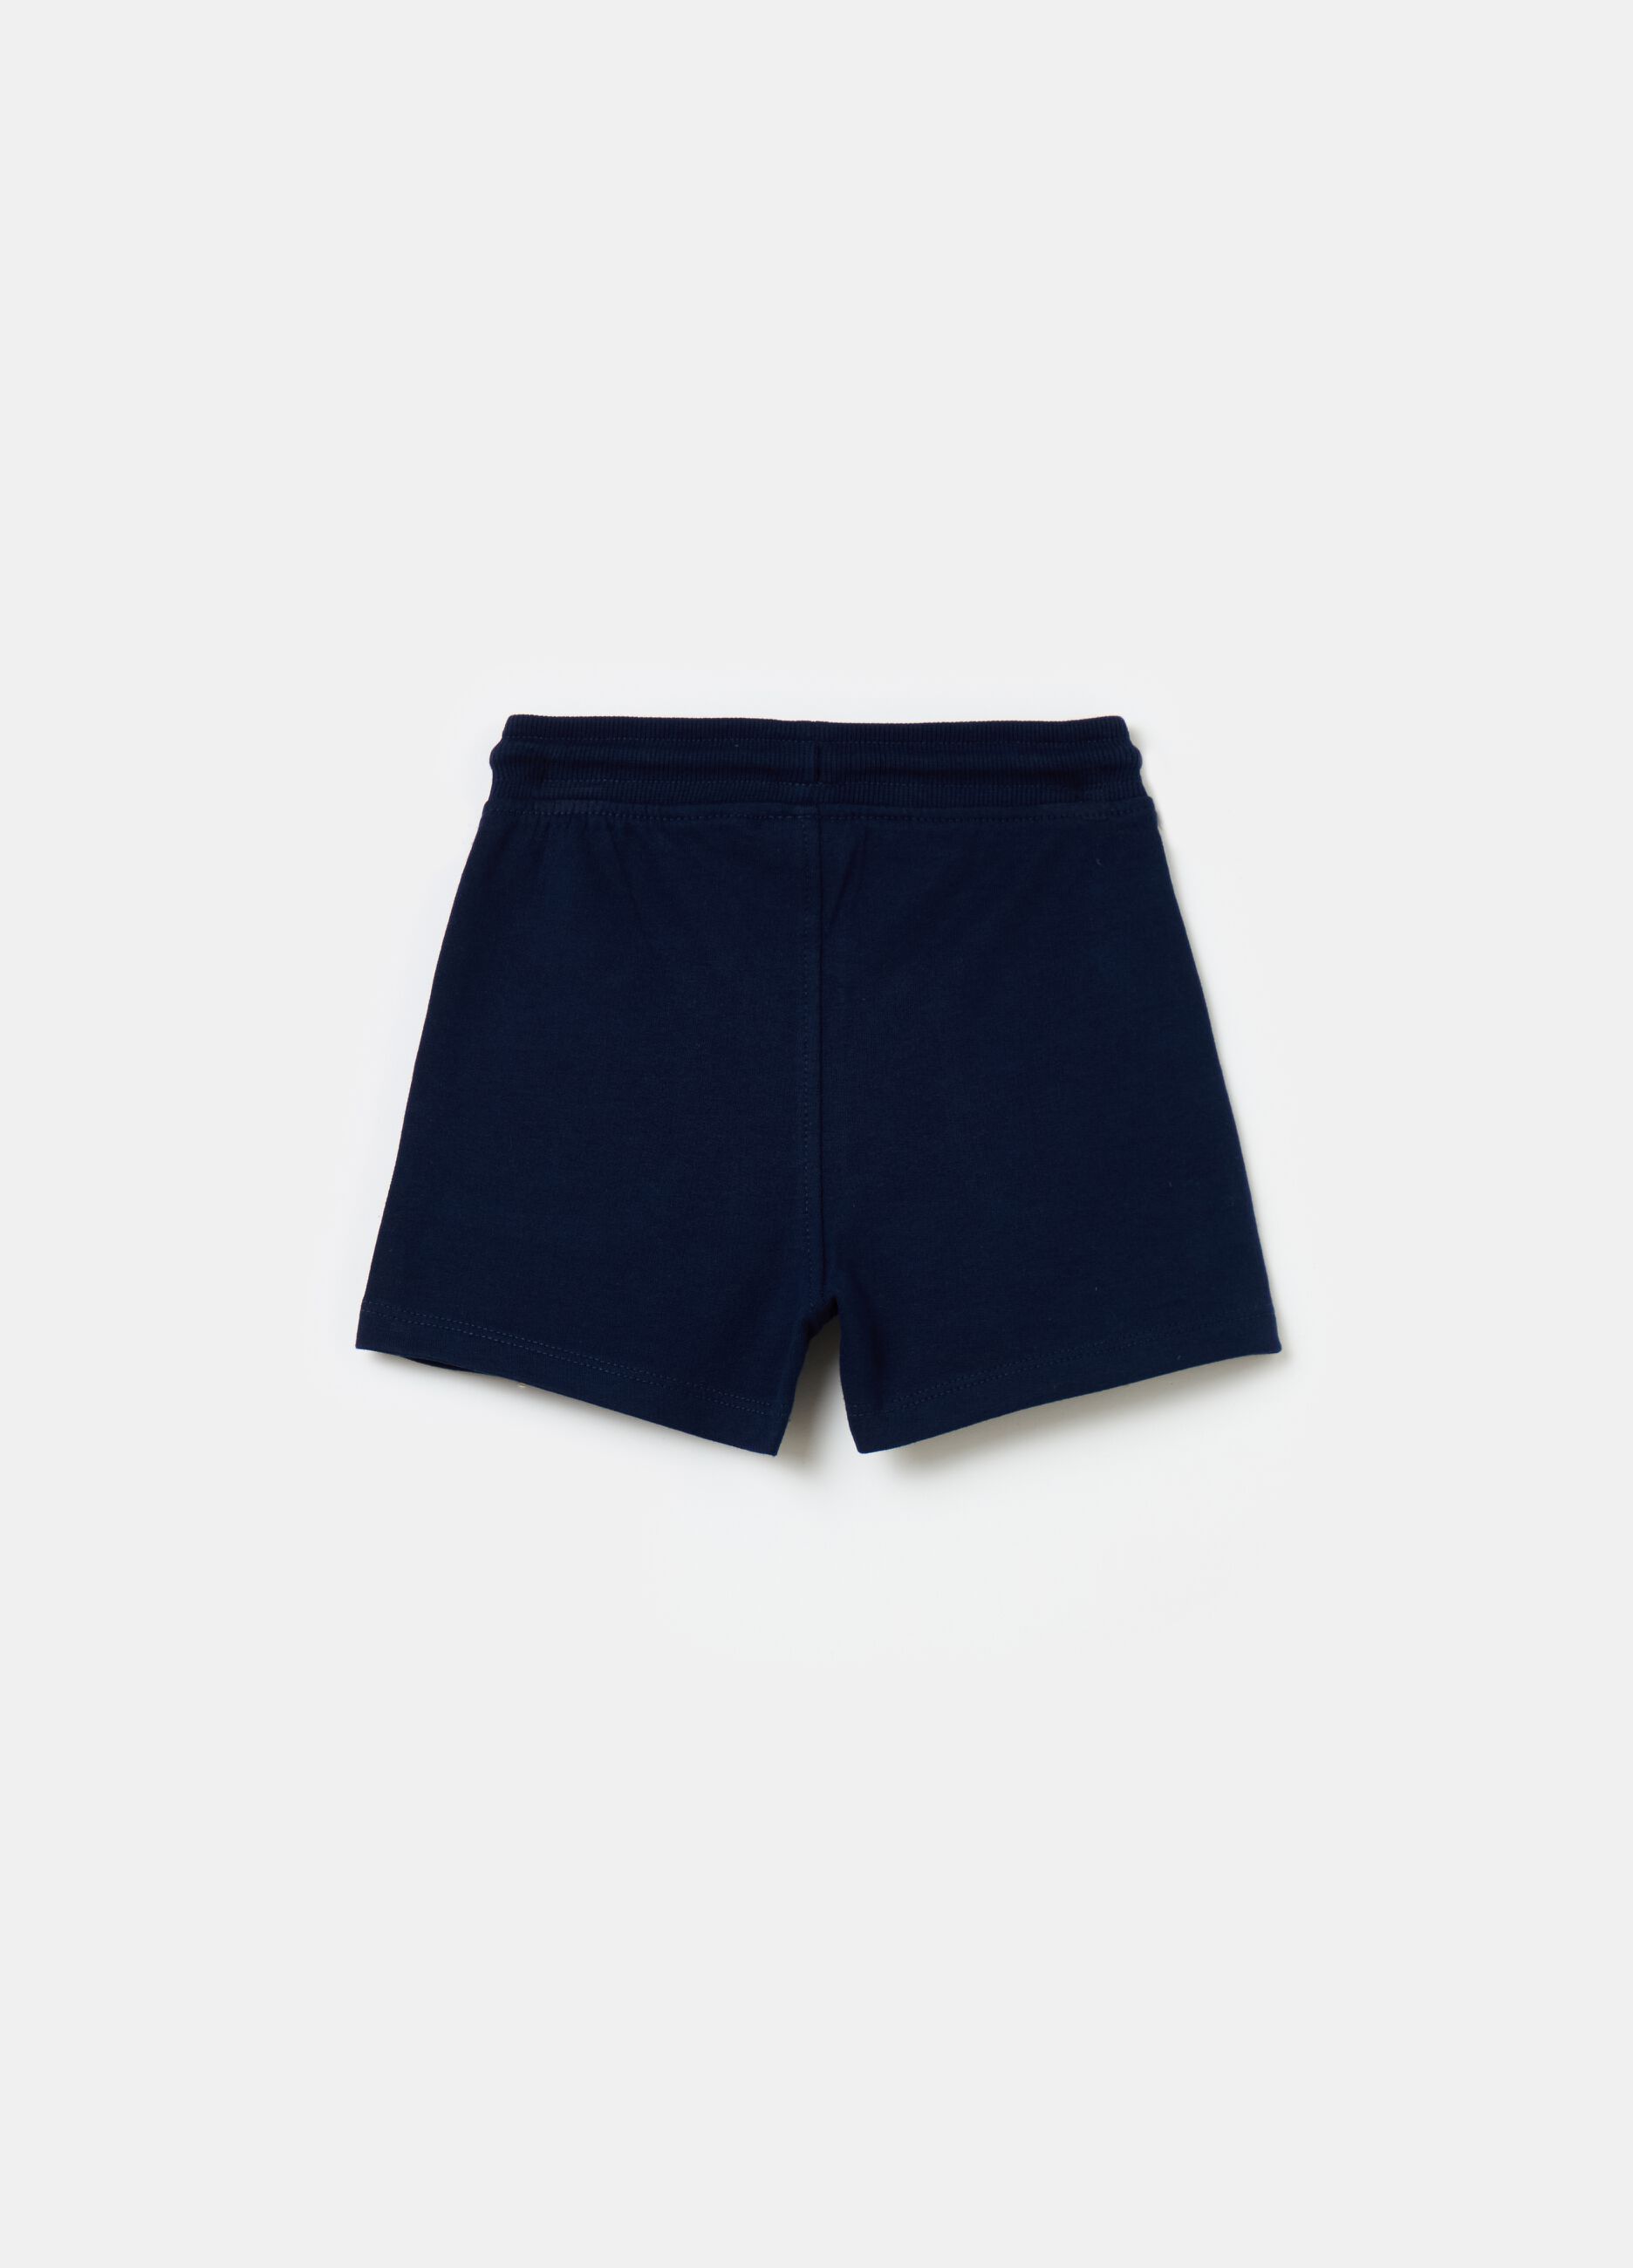 Cotton shorts with pockets and drawstring